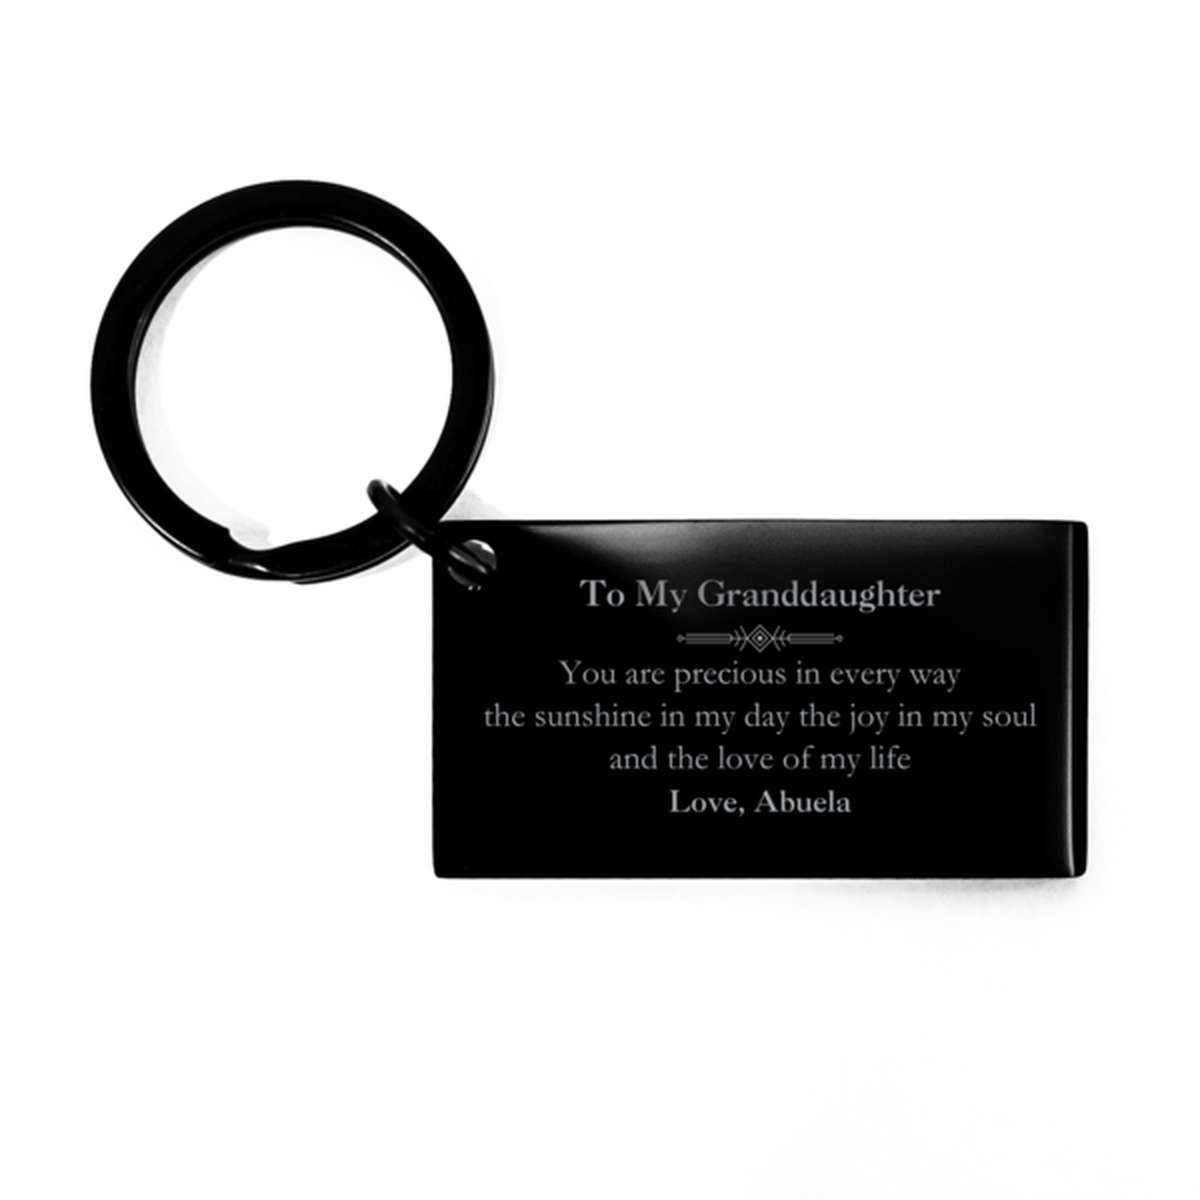 Graduation Gifts for Granddaughter Keychain Present from Abuela, Christmas Granddaughter Birthday Gifts Granddaughter You are precious in every way the sunshine in my day. Love, Abuela